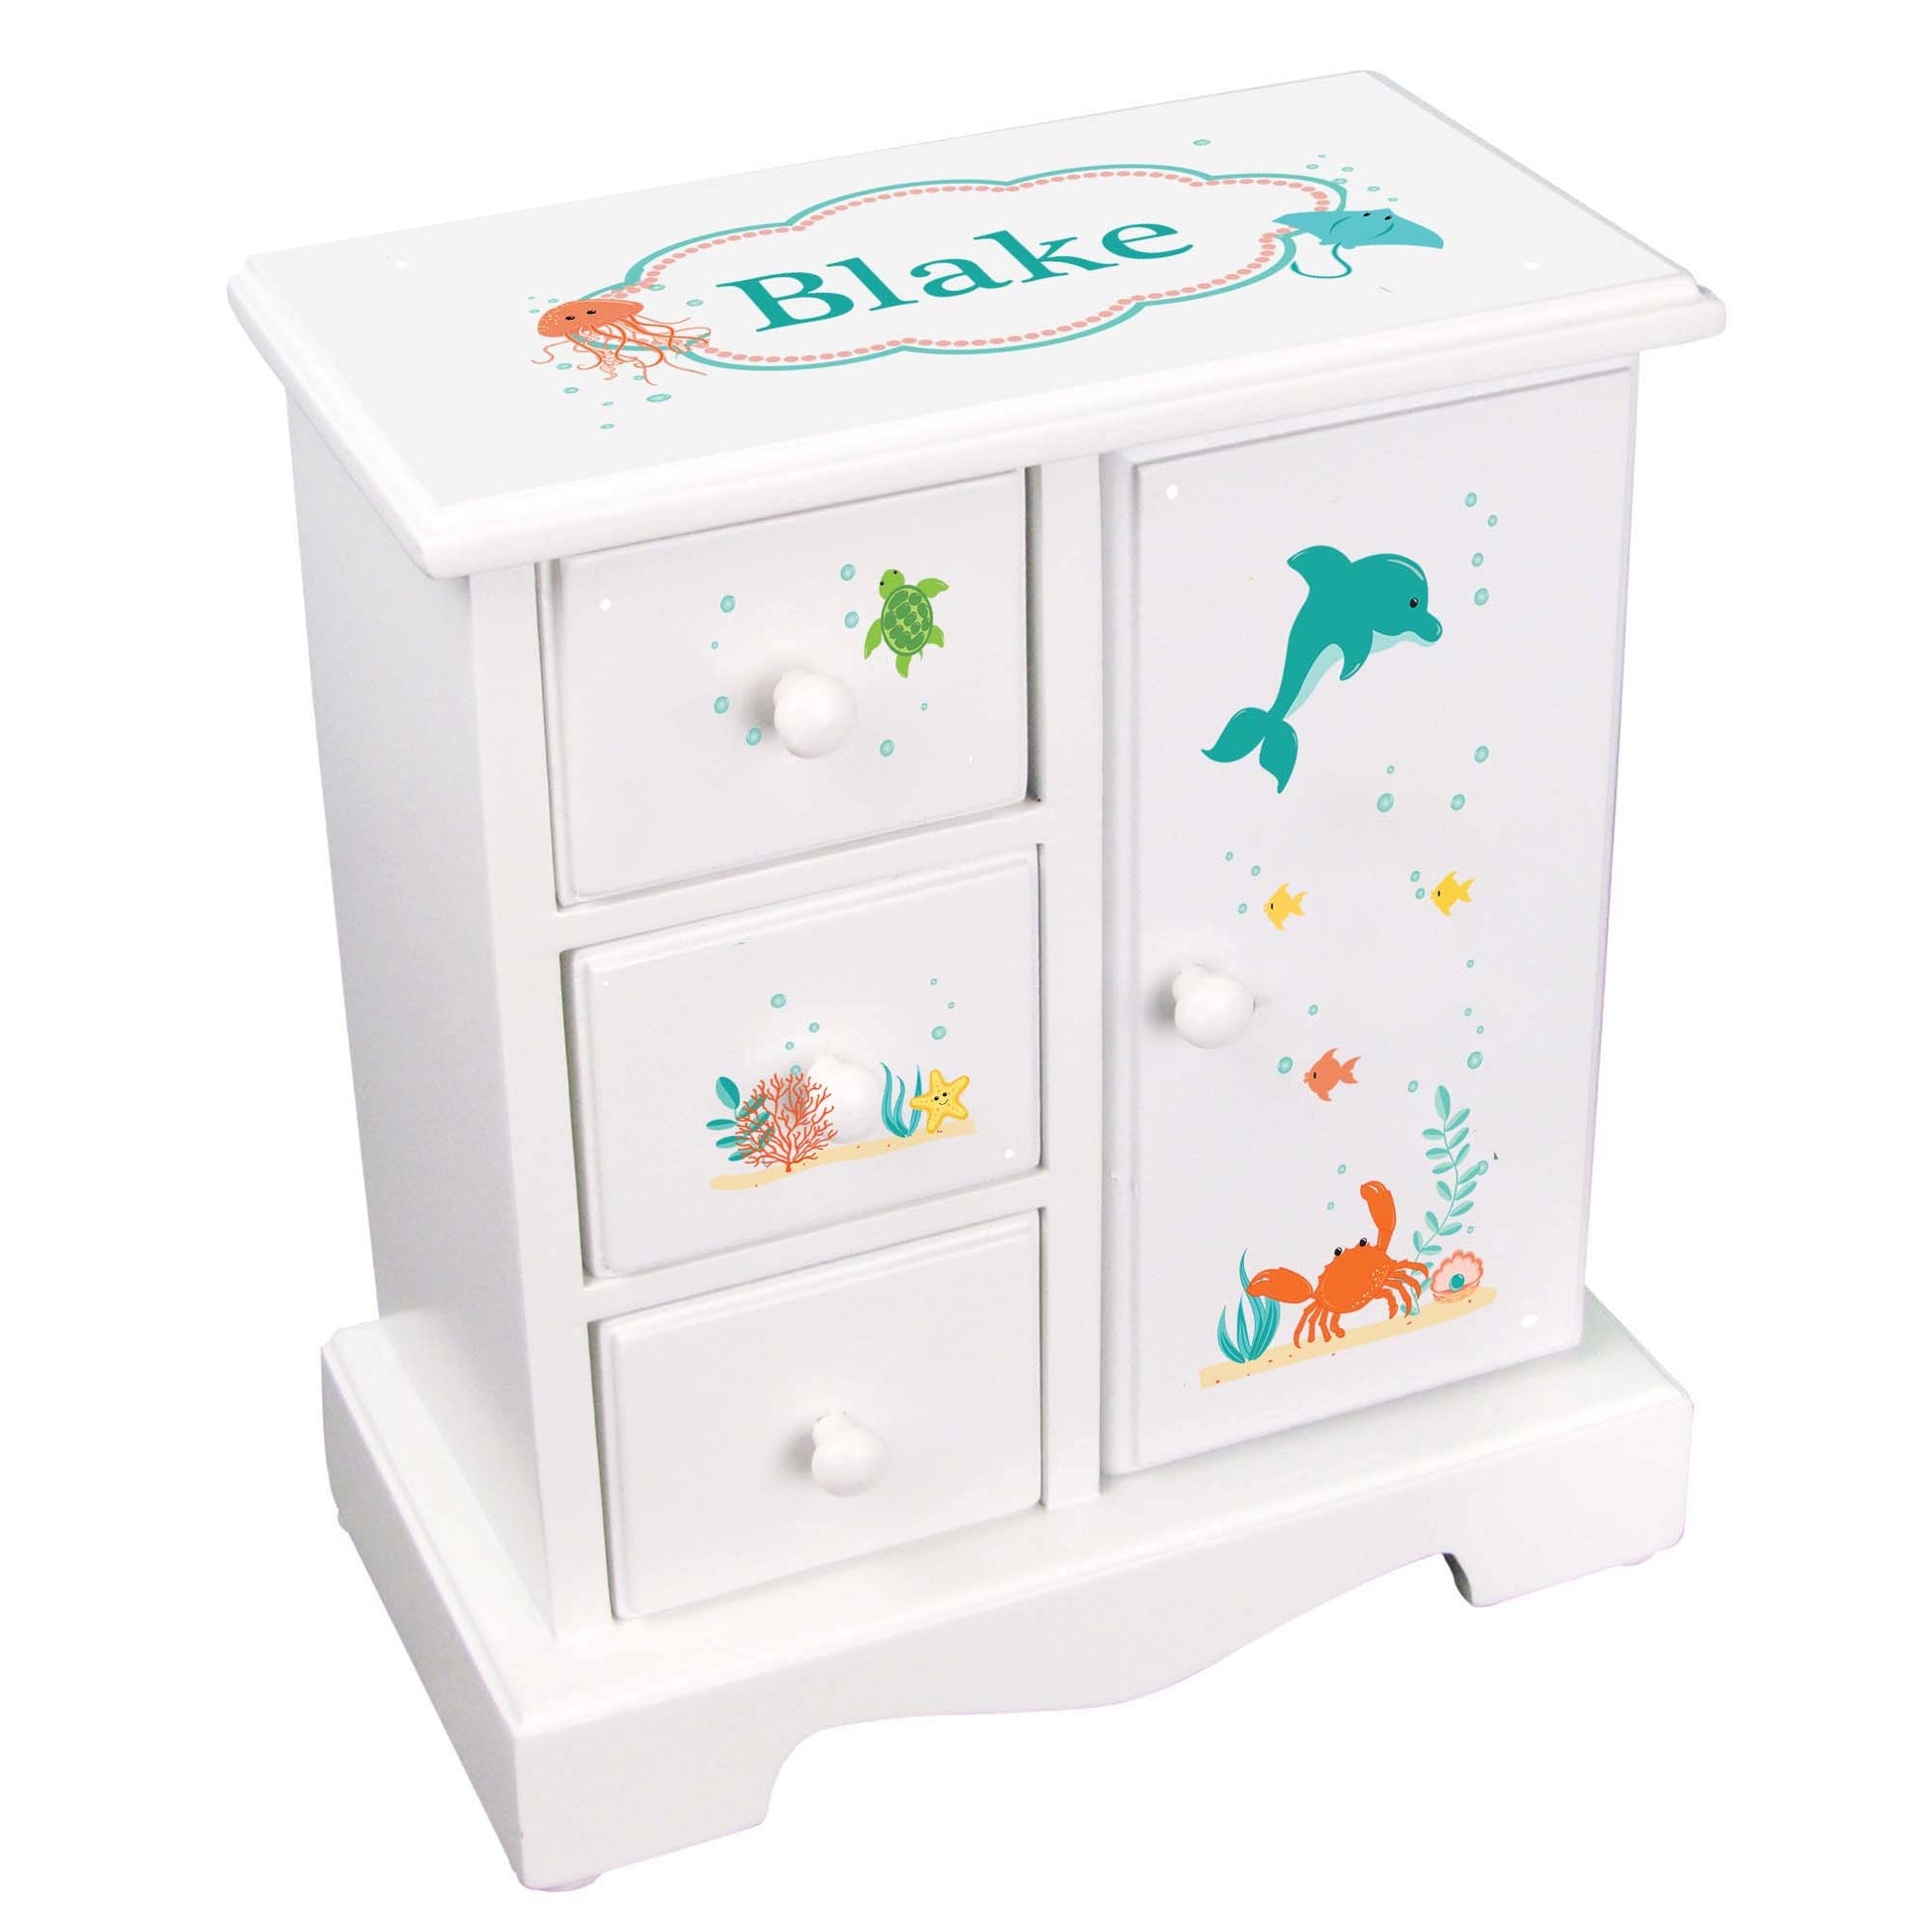 Personalized Jewelry Armoire sea life